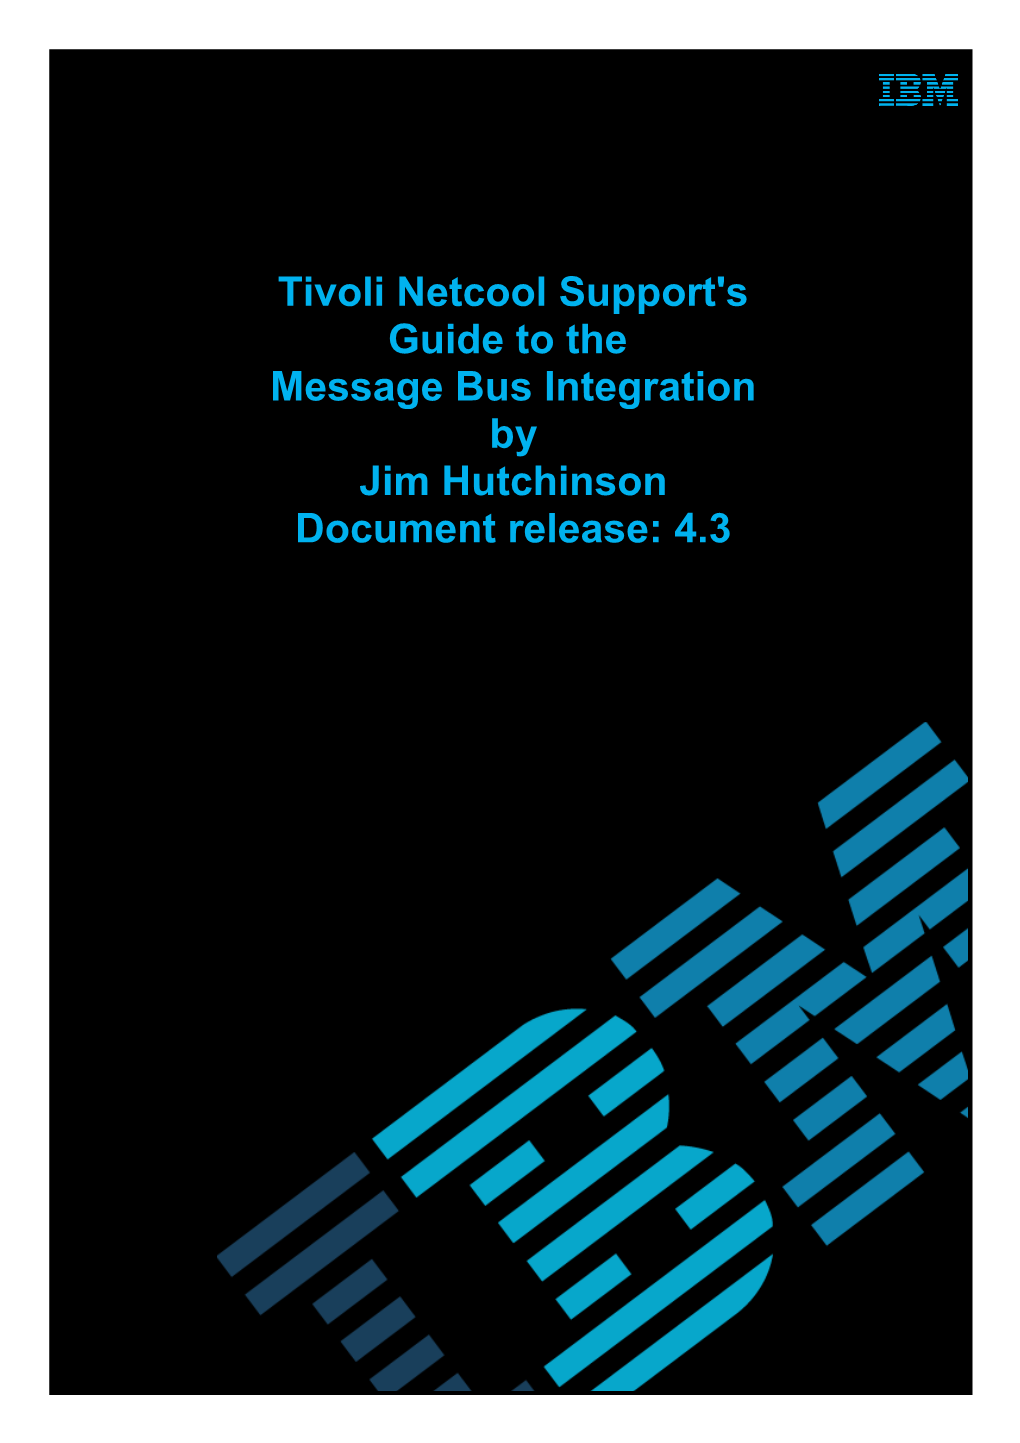 Tivoli Netcool Support's Guide to the Message Bus Integration by Jim Hutchinson Document Release: 4.3 Support's Guide to the Message Bus Integration